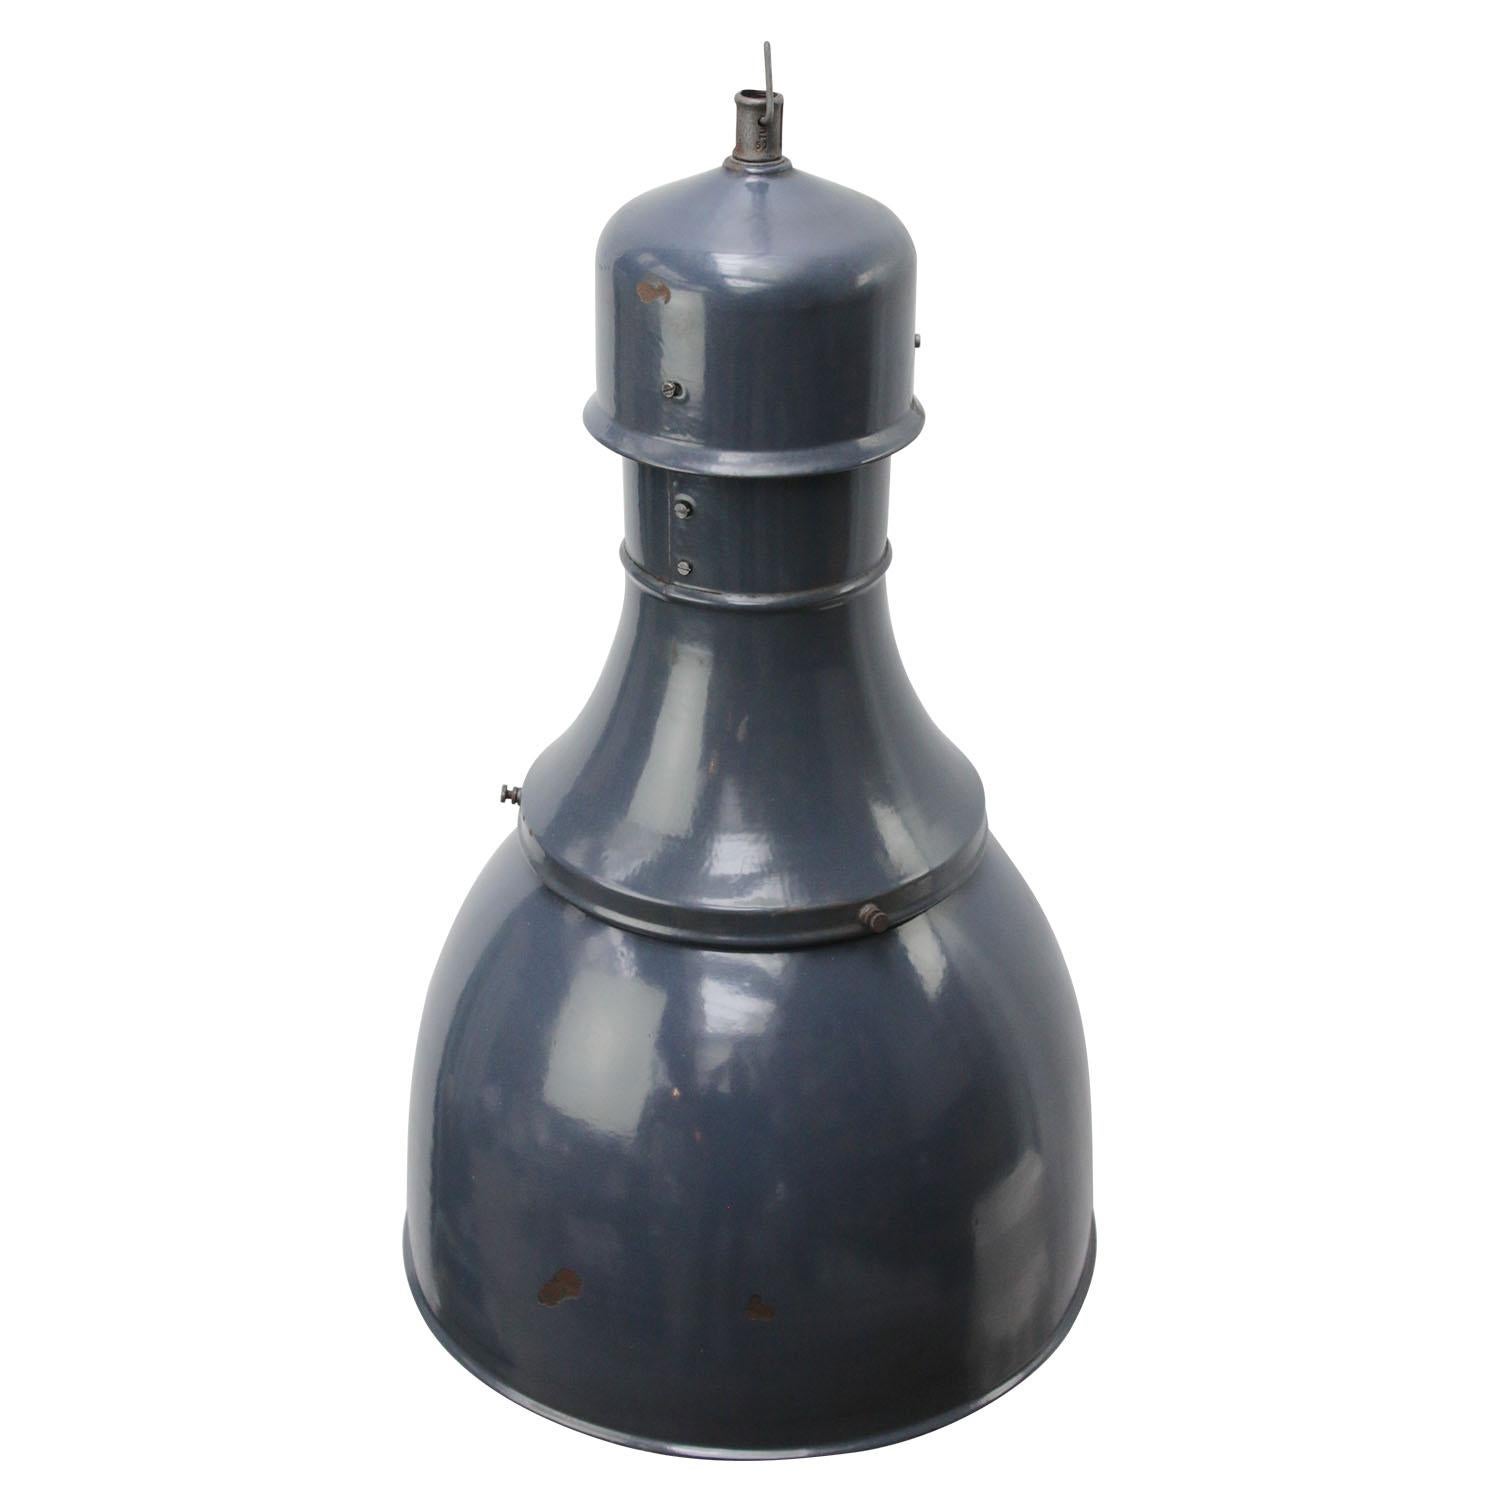 Factory light, blue enamel. White interior cast iron top.

Weight: 4.9 kg / 10.8 lb

Priced per individual item. All lamps have been made suitable by international standards for incandescent light bulbs, energy-efficient and LED bulbs. E26/E27